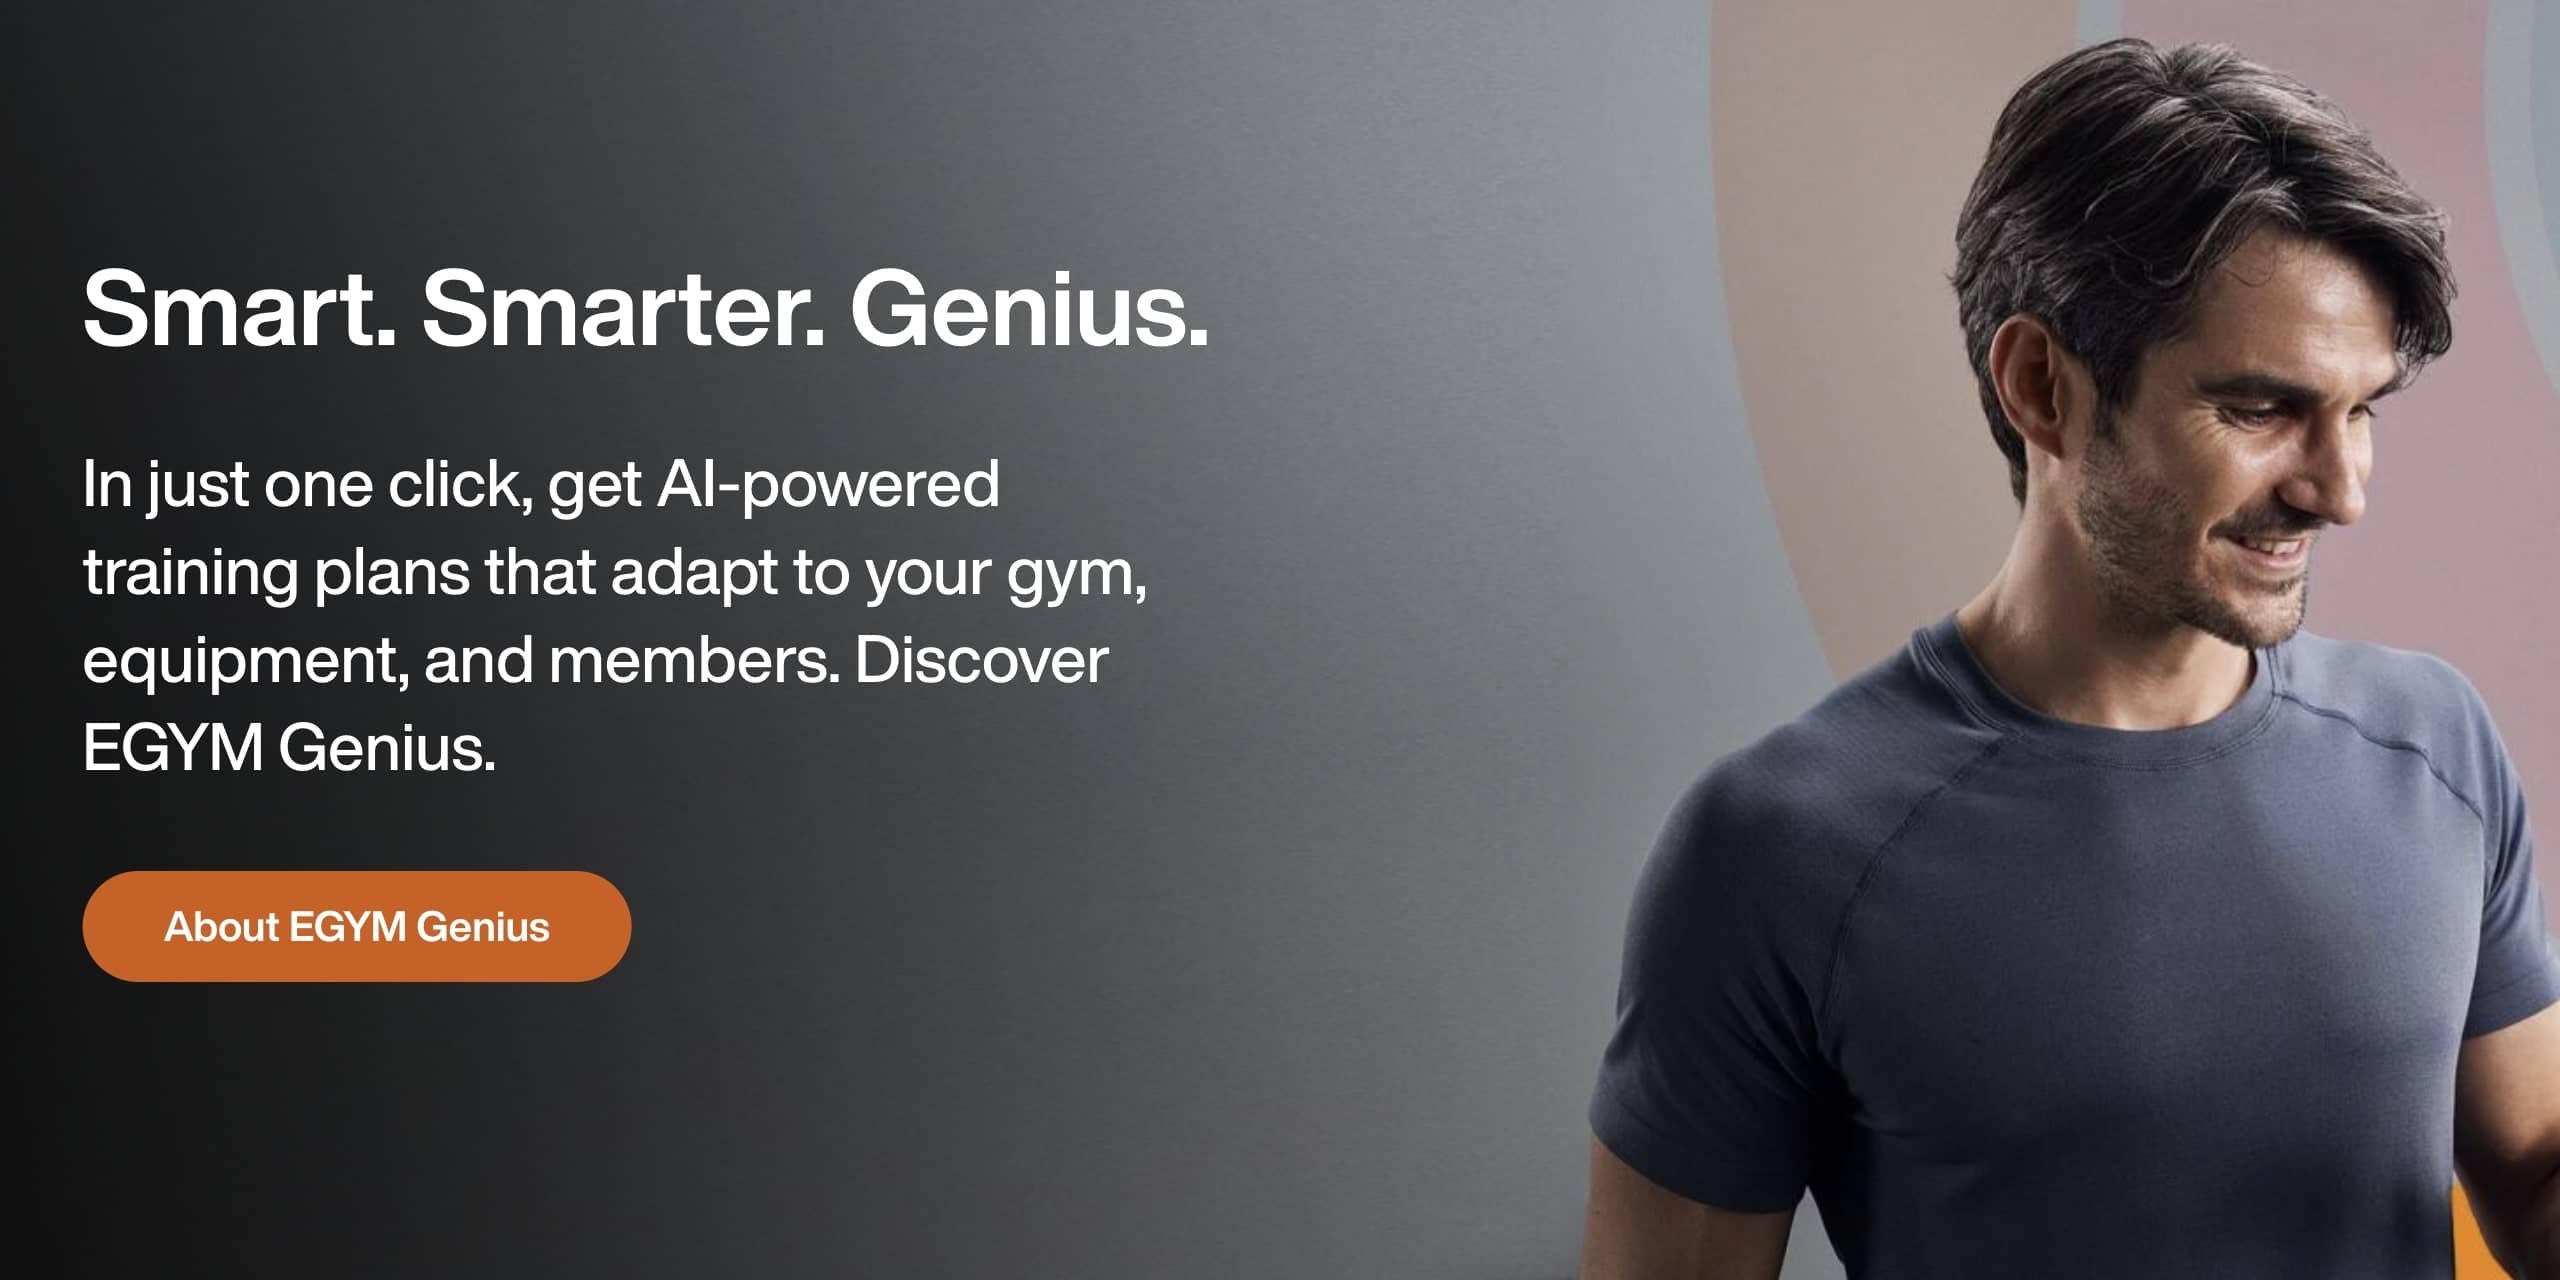 A man in a blue shirt looks down while standing next to text promoting EGYM Genius, an AI-powered tool for creating gym training plans. Discover why Fitness Tech Companies have ranked it among their top innovations for 2024. An orange button labeled "About EGYM Genius" is below the text.